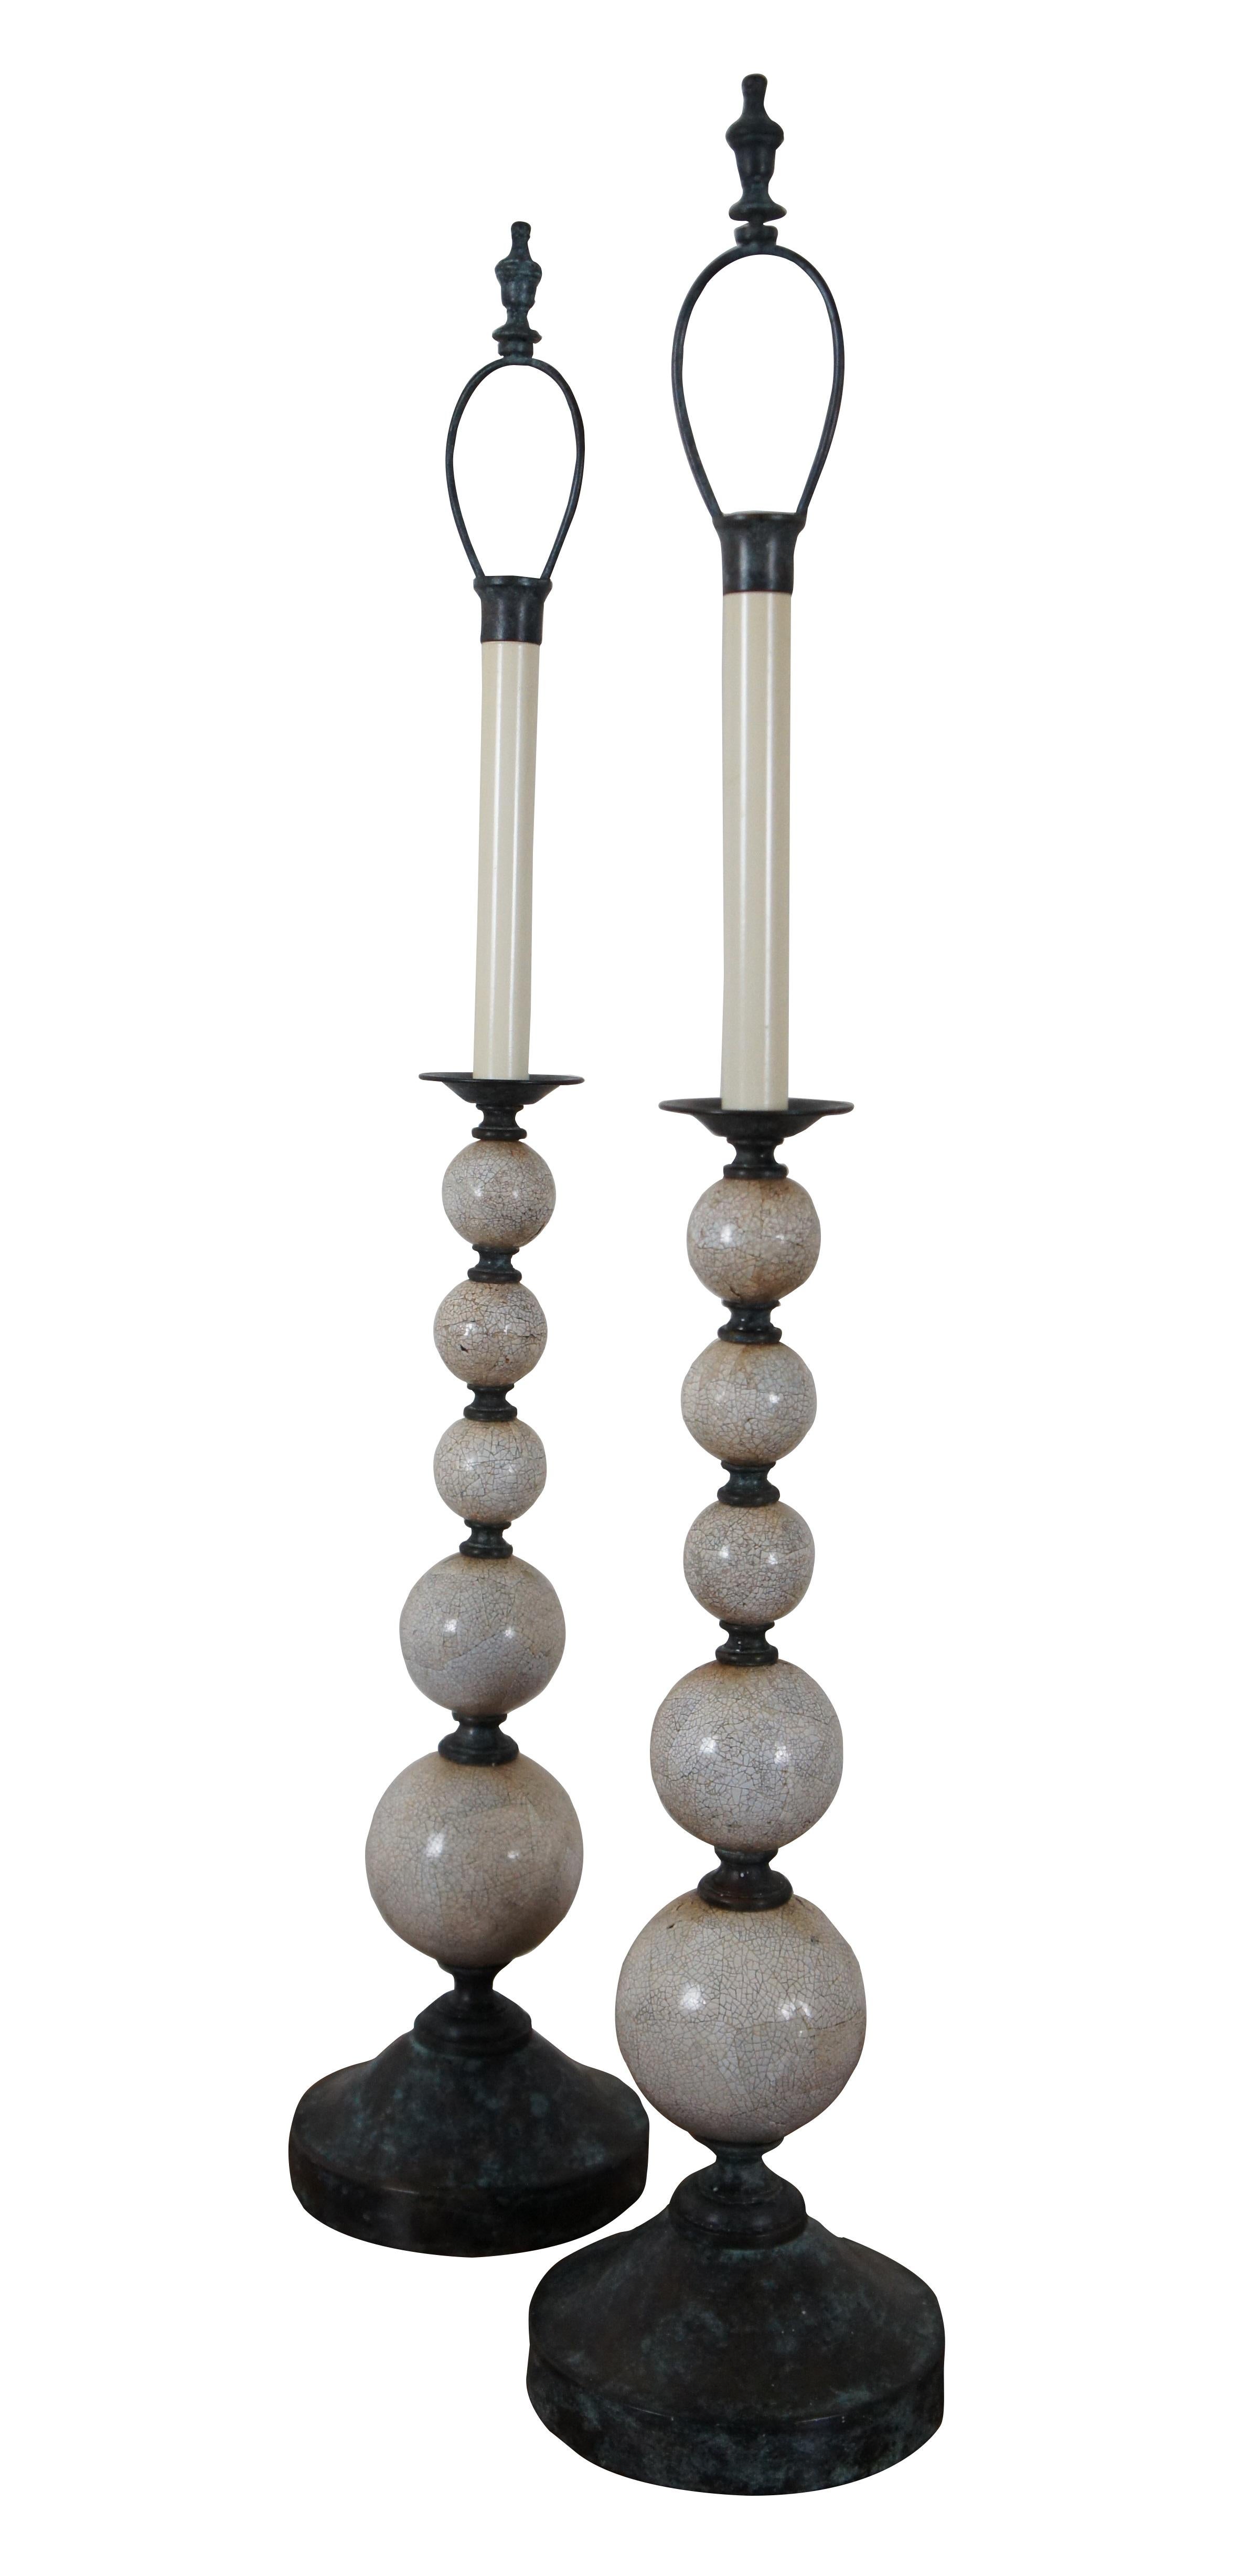 Pair of two Maitland Smith buffet / table lamps featuring round bronze bases and urn shaped finials with factory distressed patina / verdigris, with a series of five stacked white shell mosaic balls of graduated sizes supporting faux candlestick